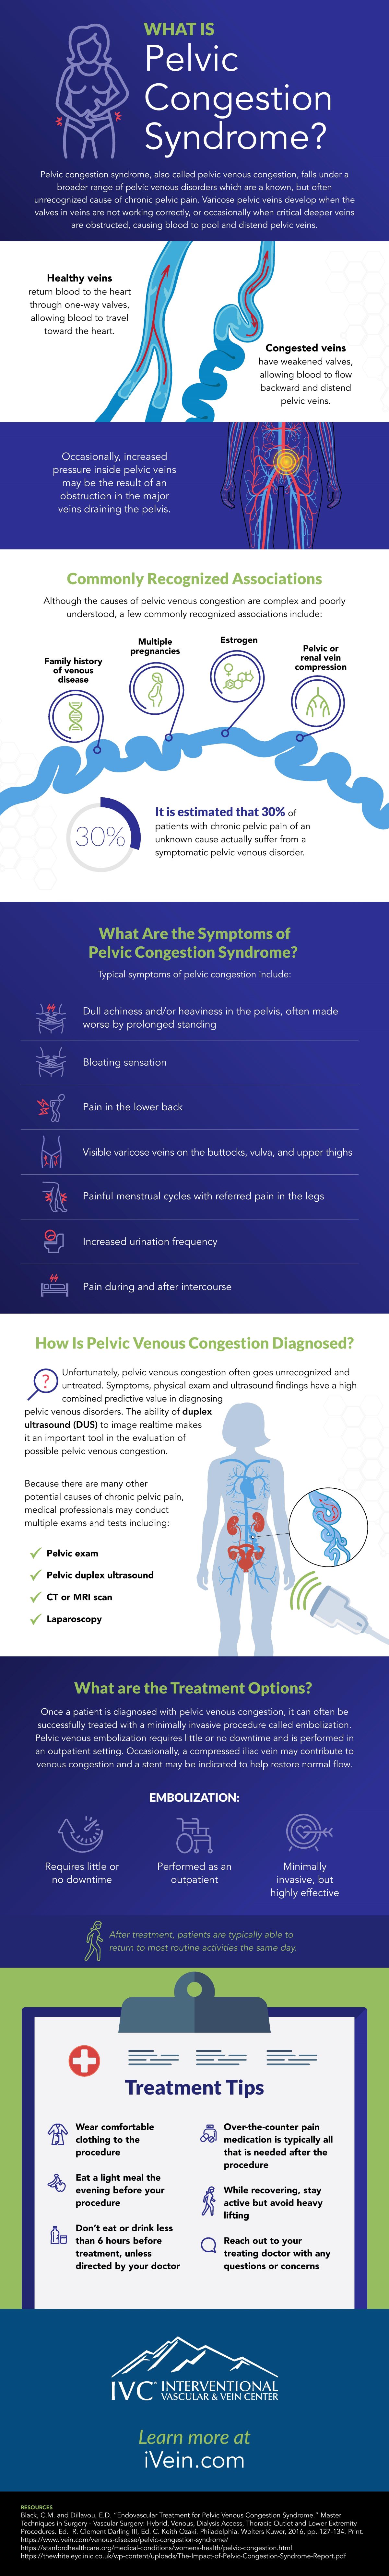 infographic describing the diagnosis and treatment of pelvic congestion syndrome